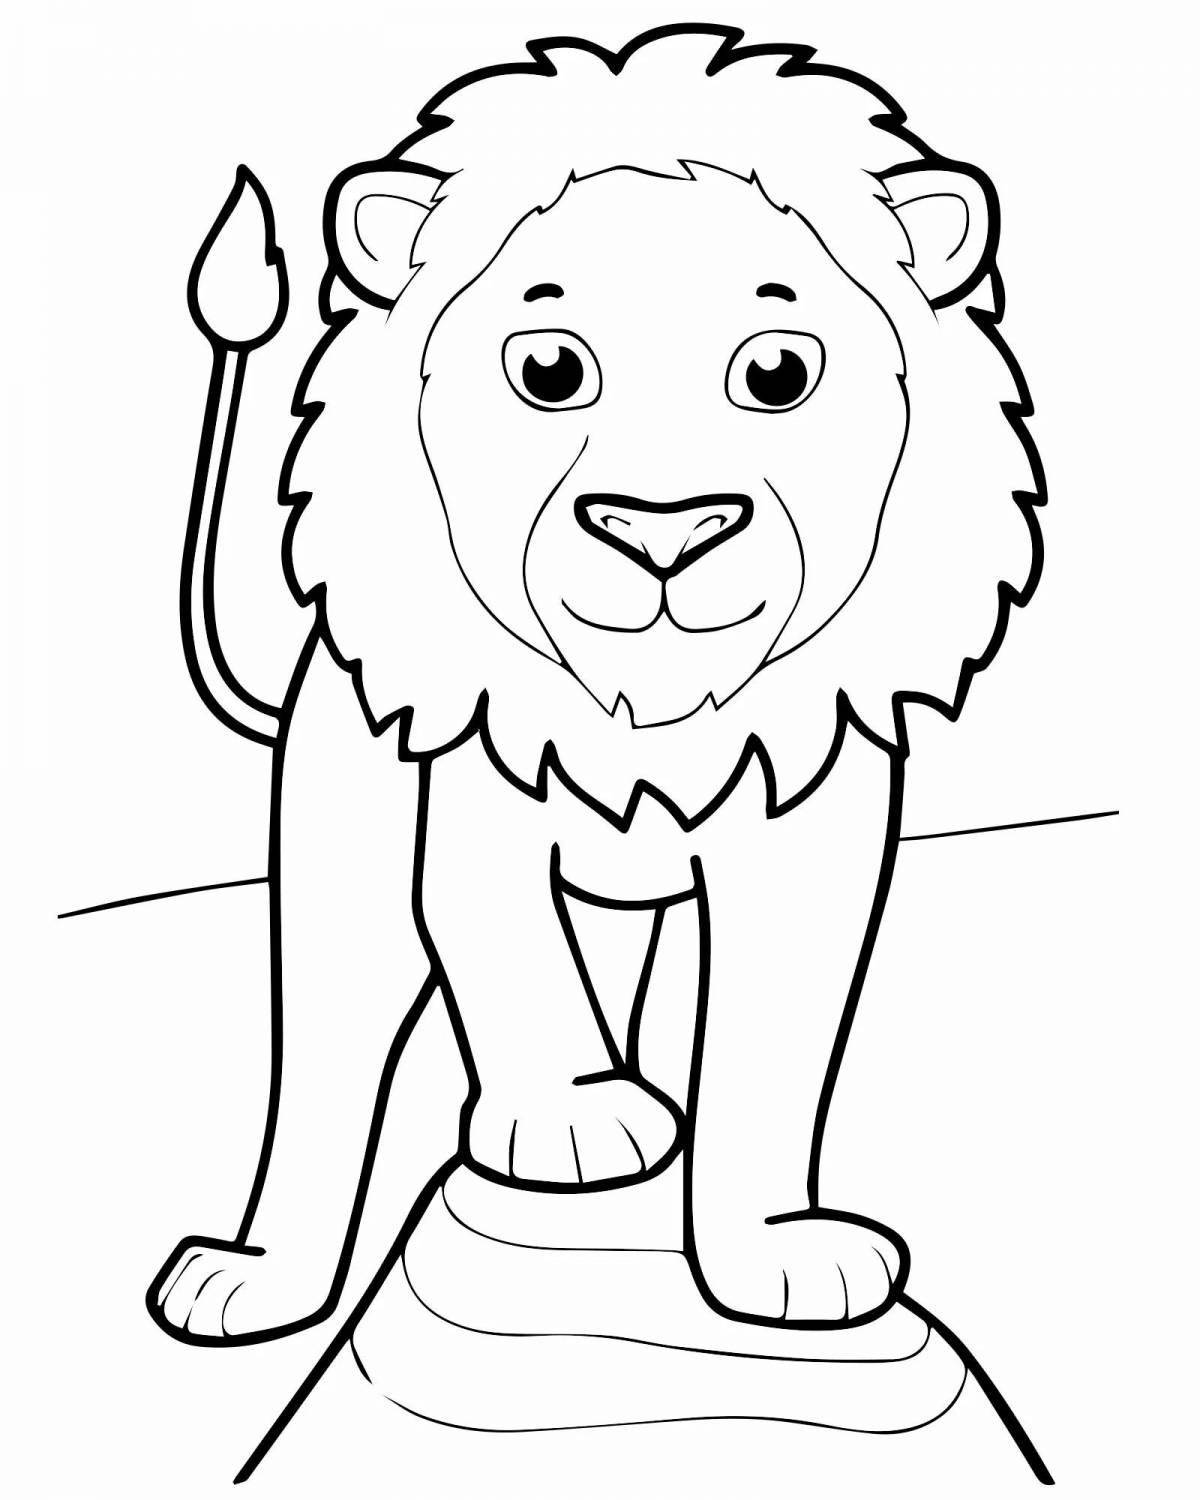 Exquisite lion coloring book for kids